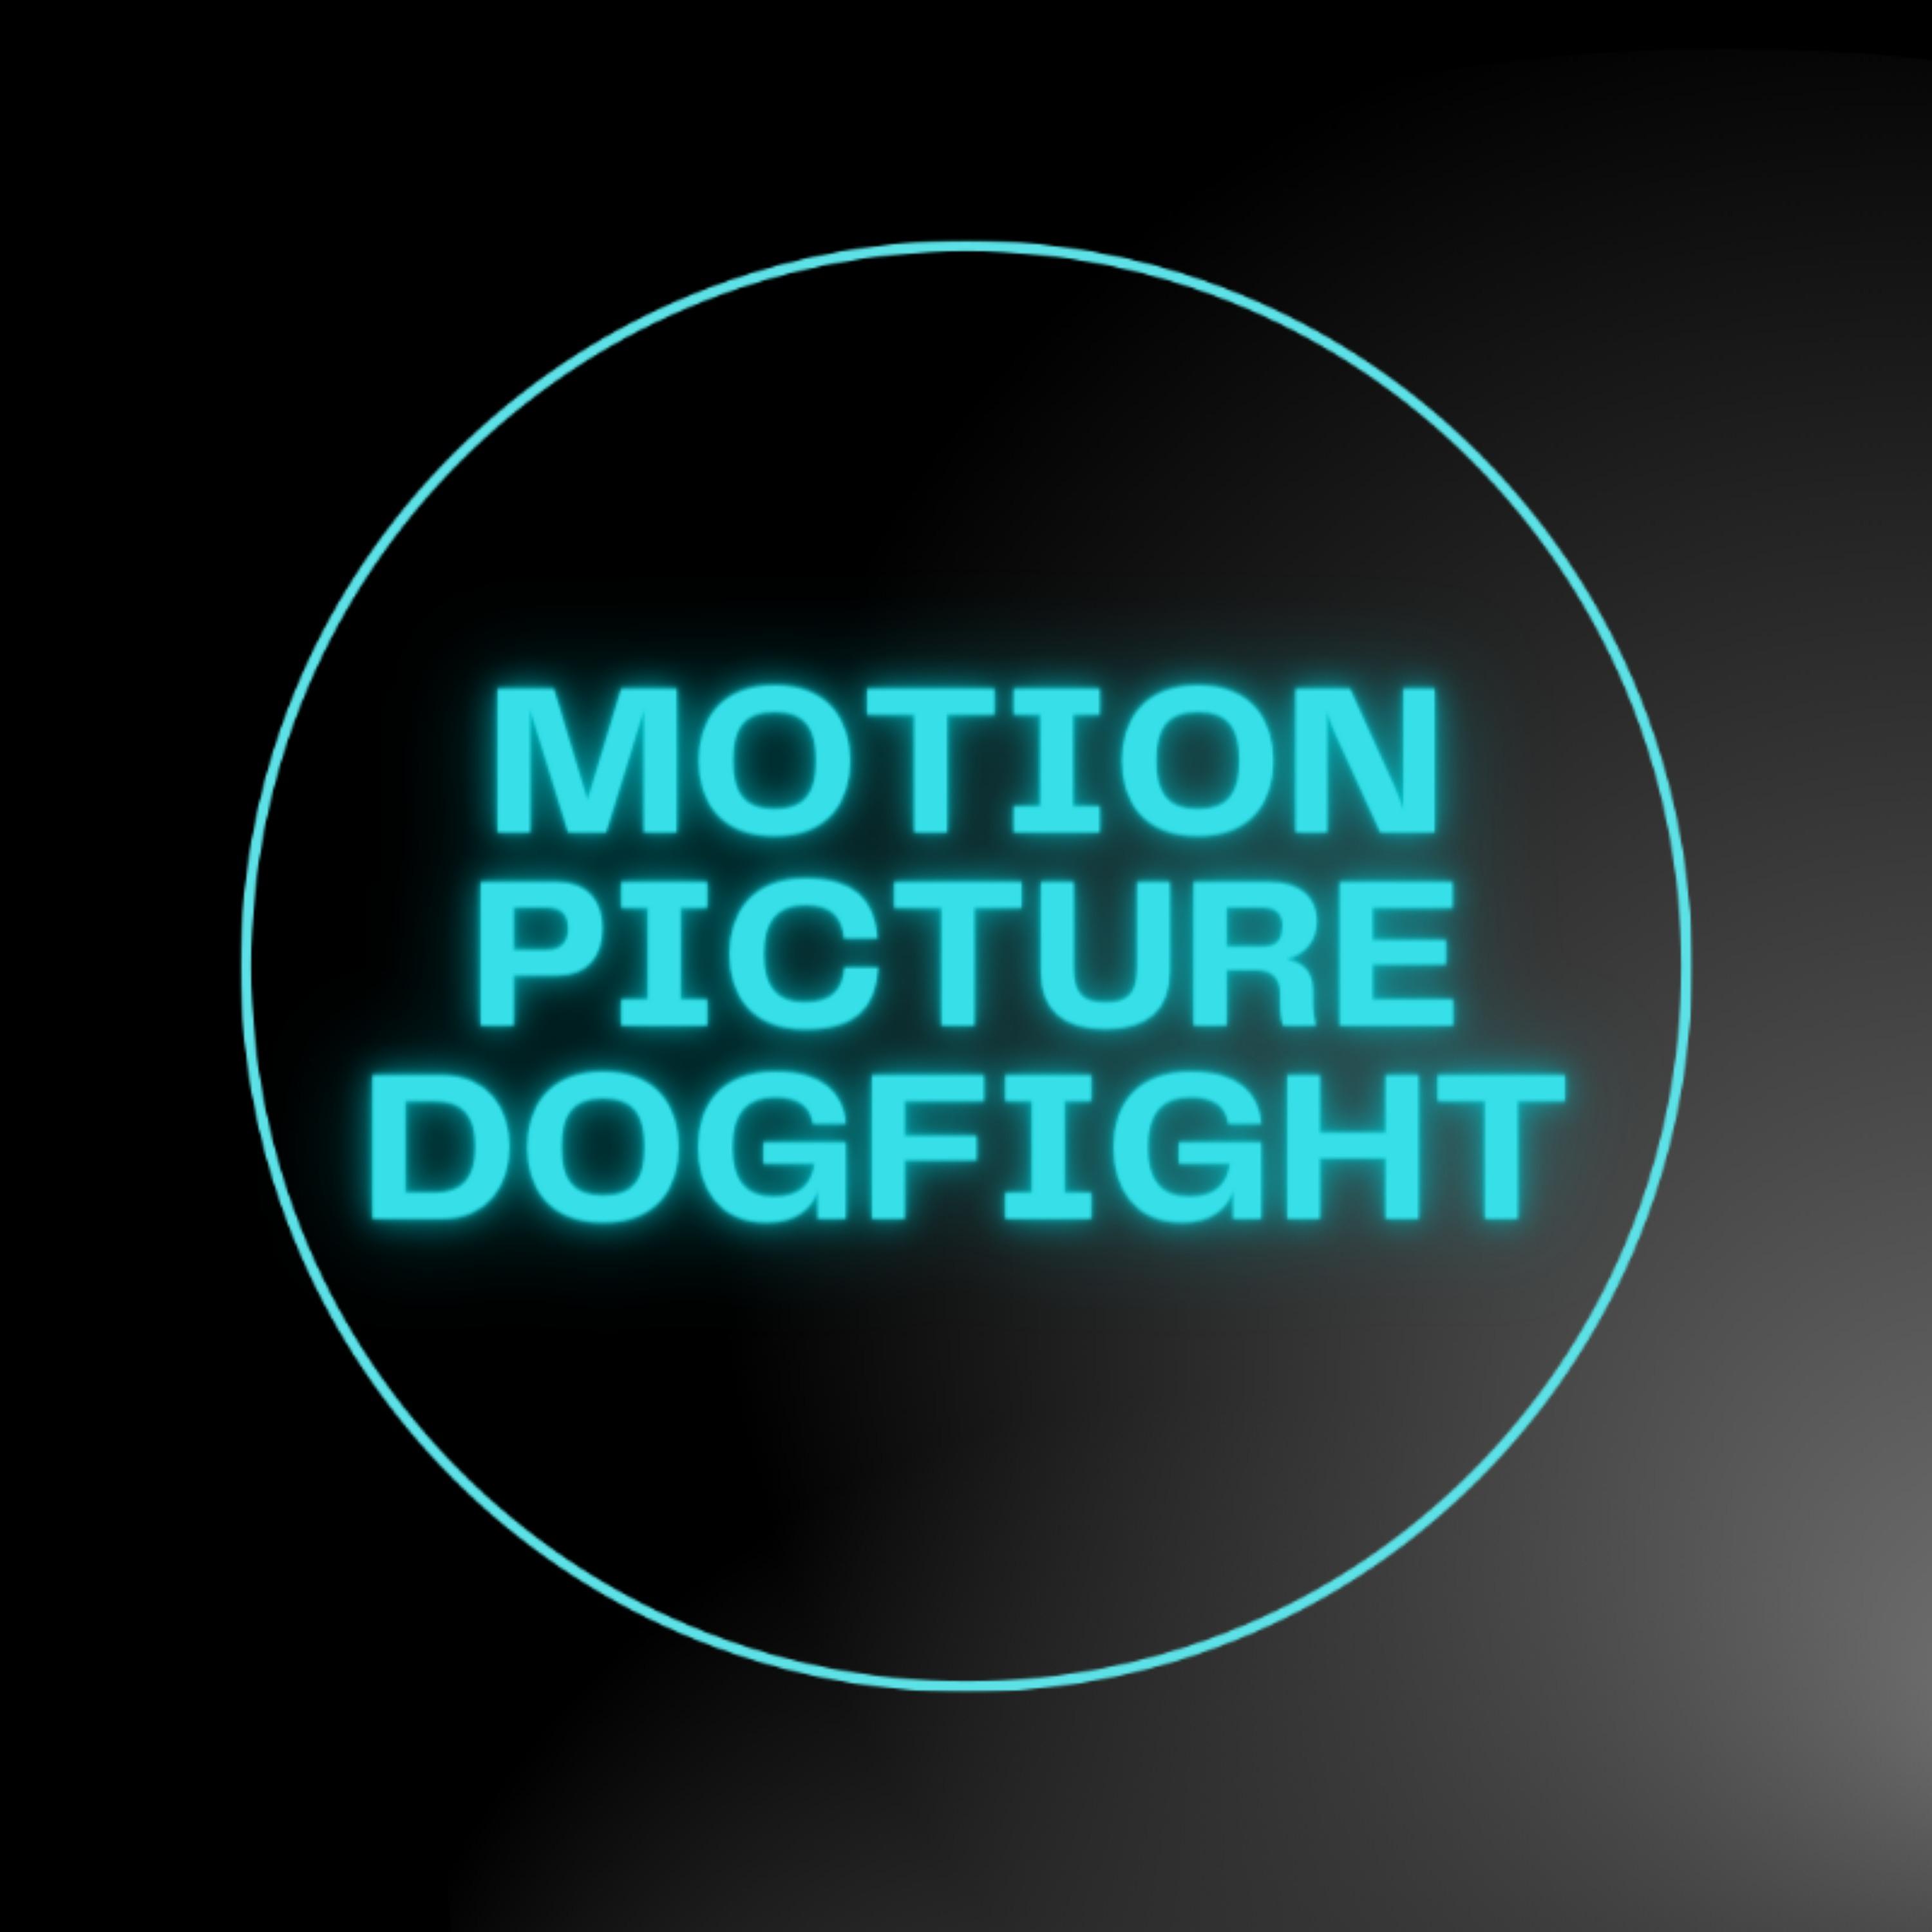 Motion Picture Dogfight